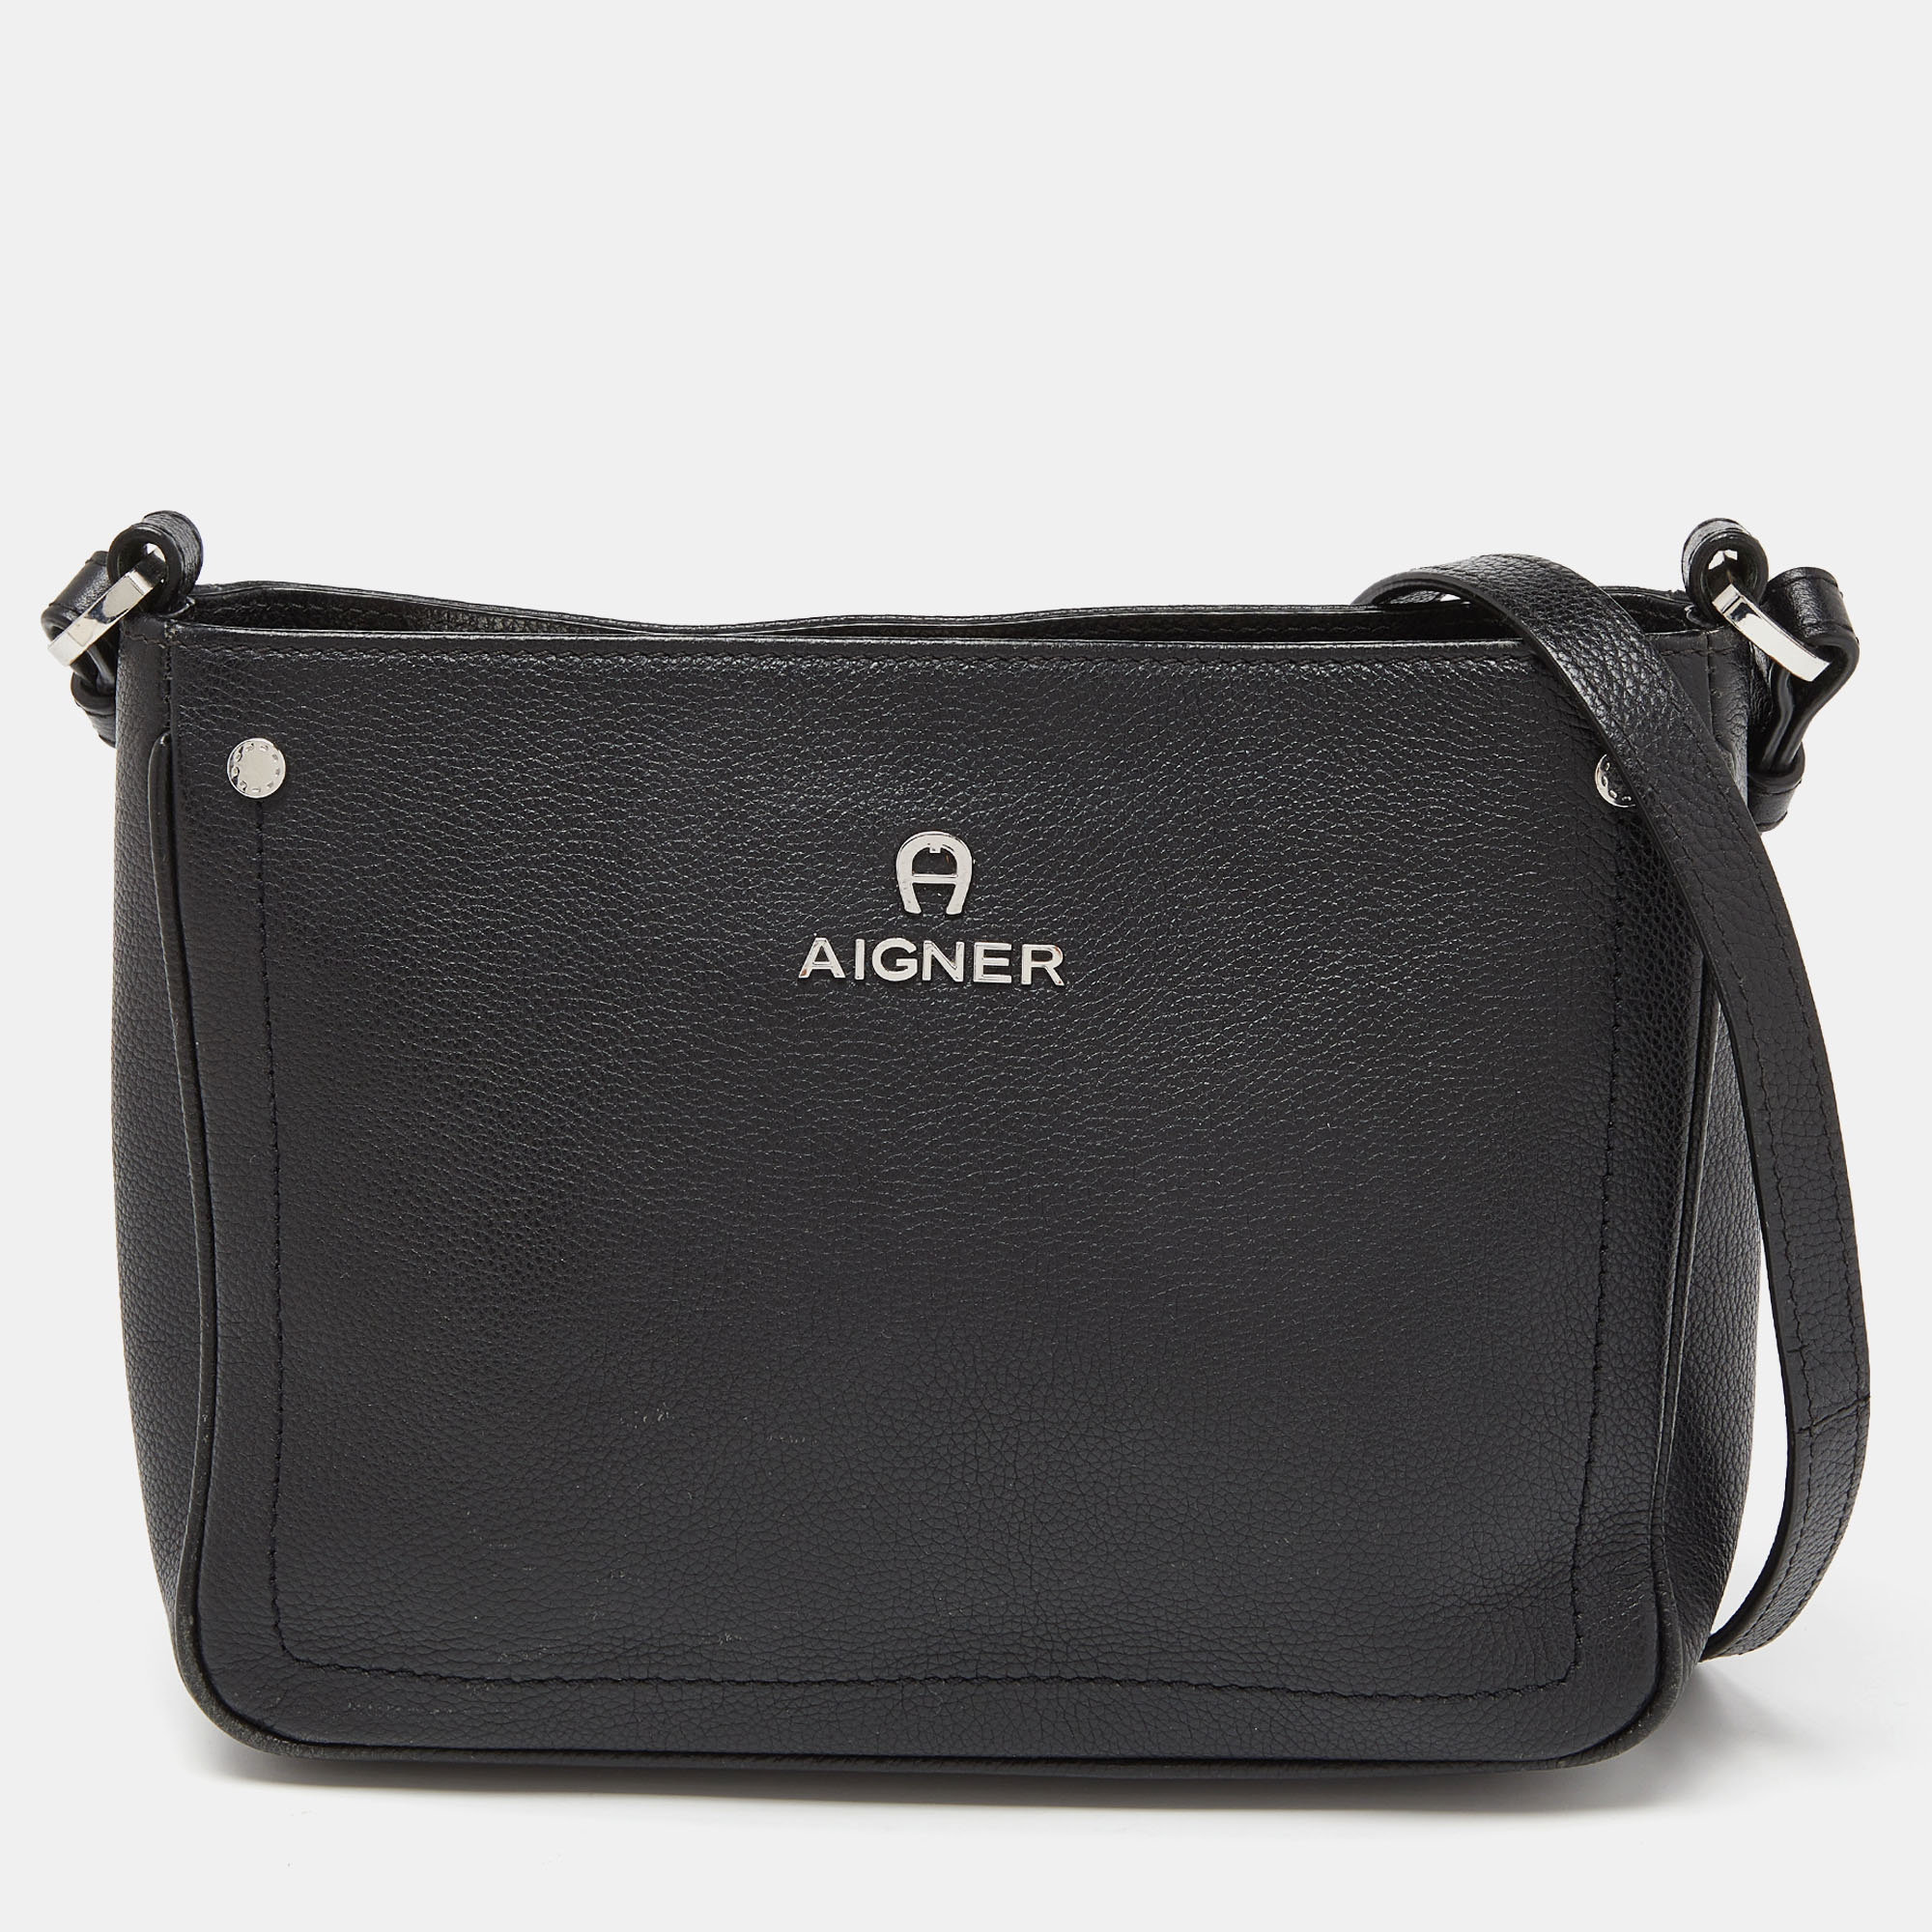 Express your style with this Aigner crossbody bag. Crafted from quality materials it has been added with fine details and is finished perfectly. It features a well sized interior.